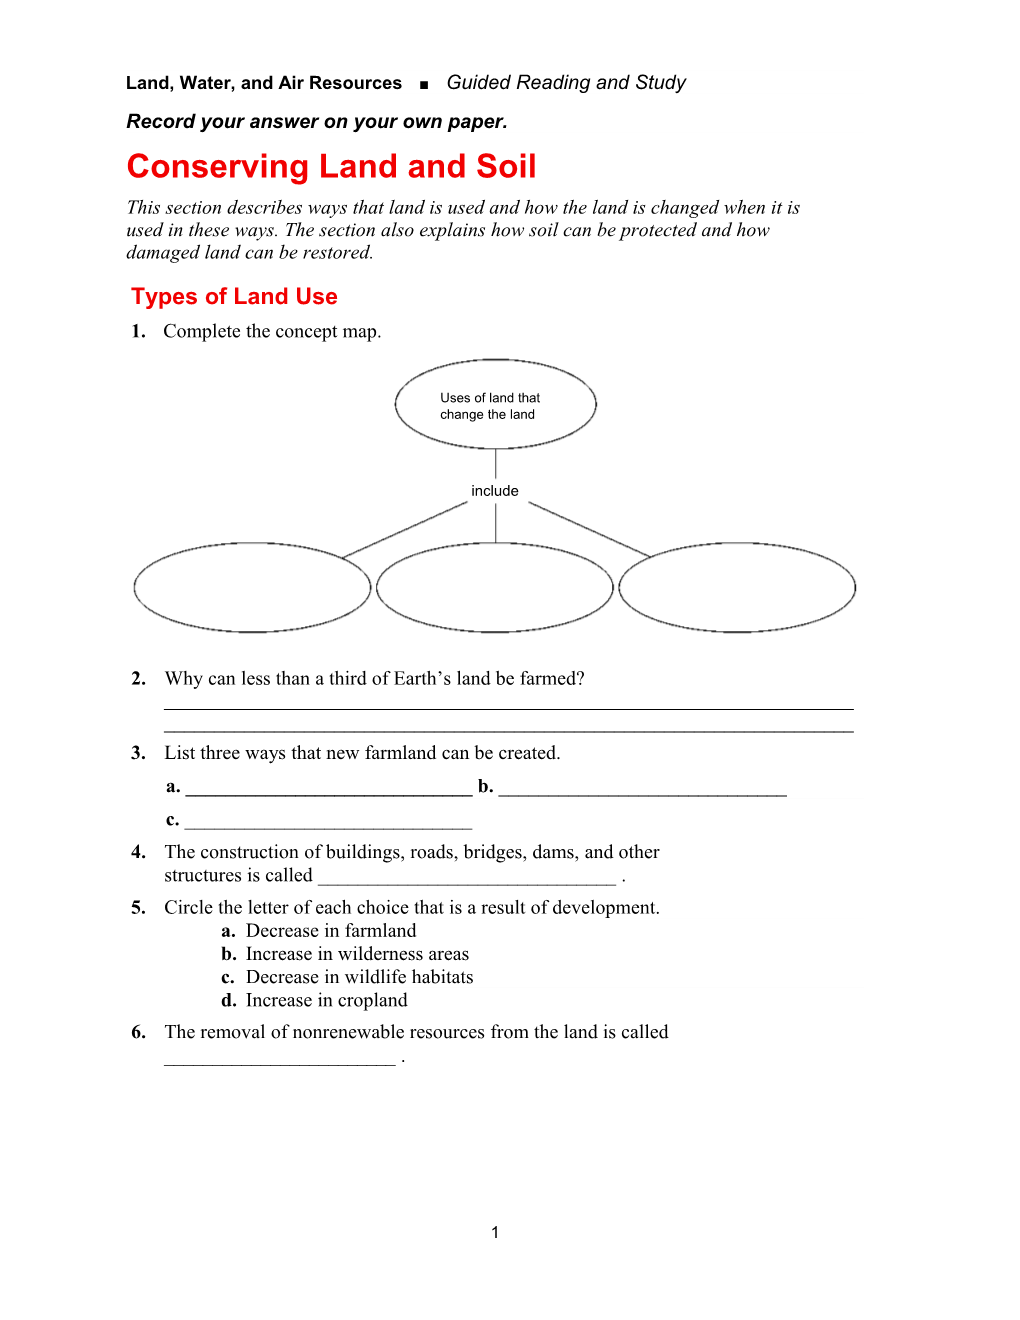 Land, Water, and Air Resources Guided Reading and Study